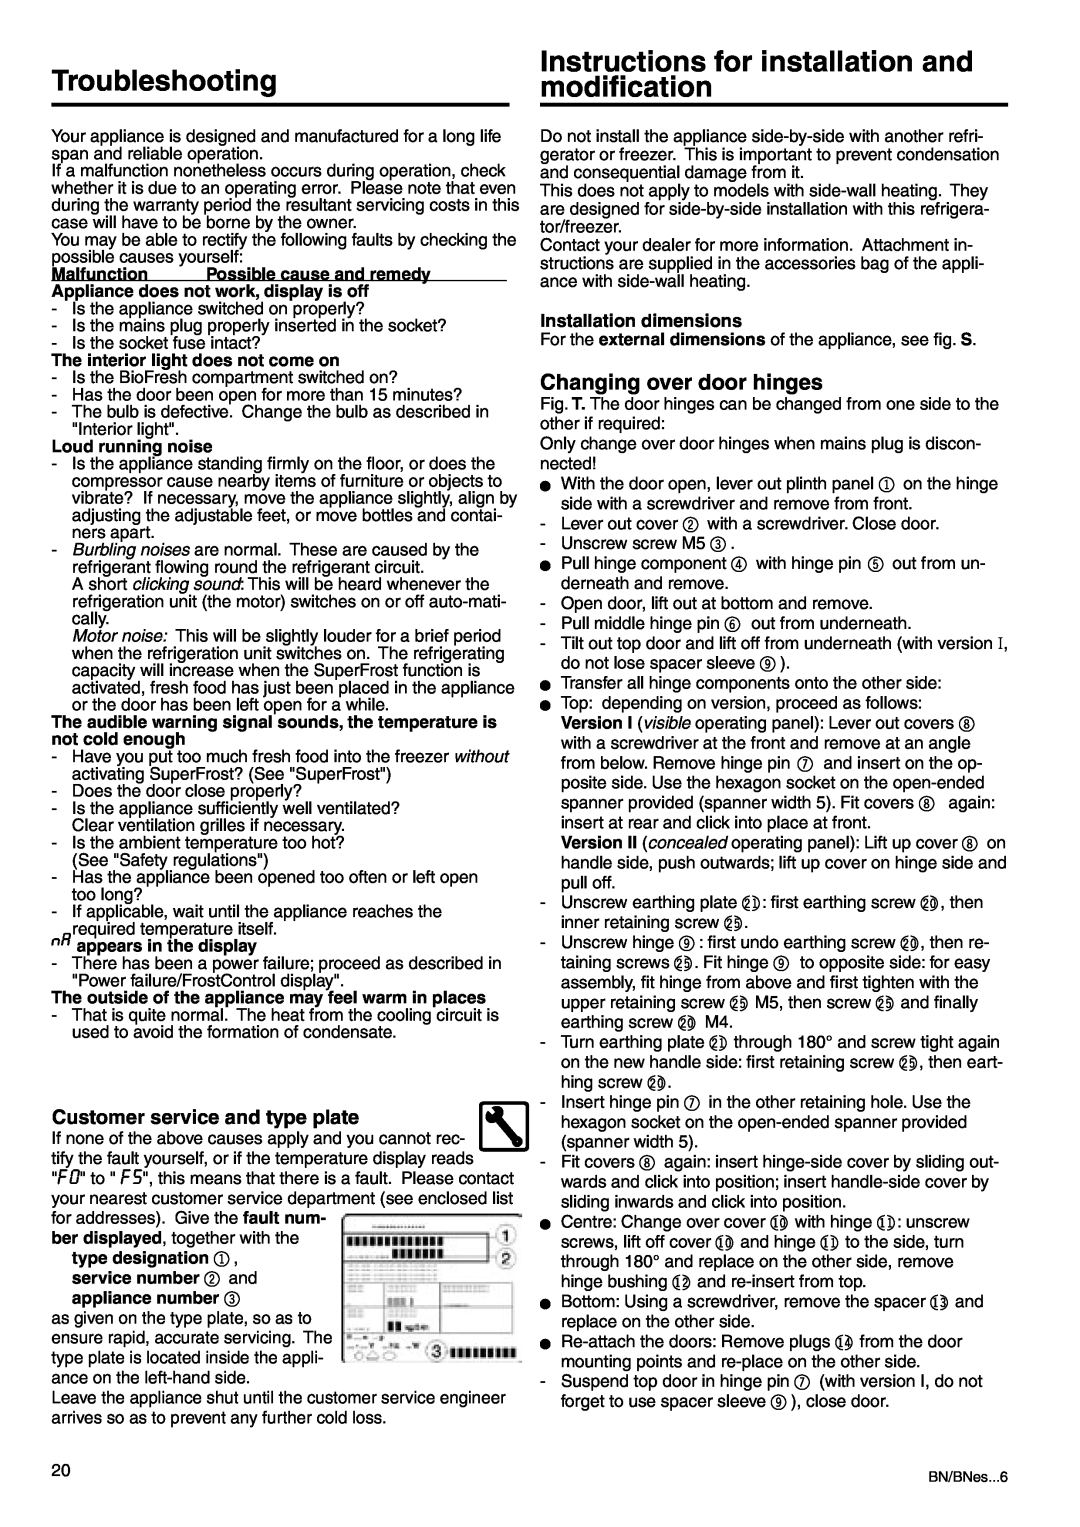 Liebherr 7082 218-03 manual Troubleshooting, Instructions for installation and modiﬁcation, Changing over door hinges 